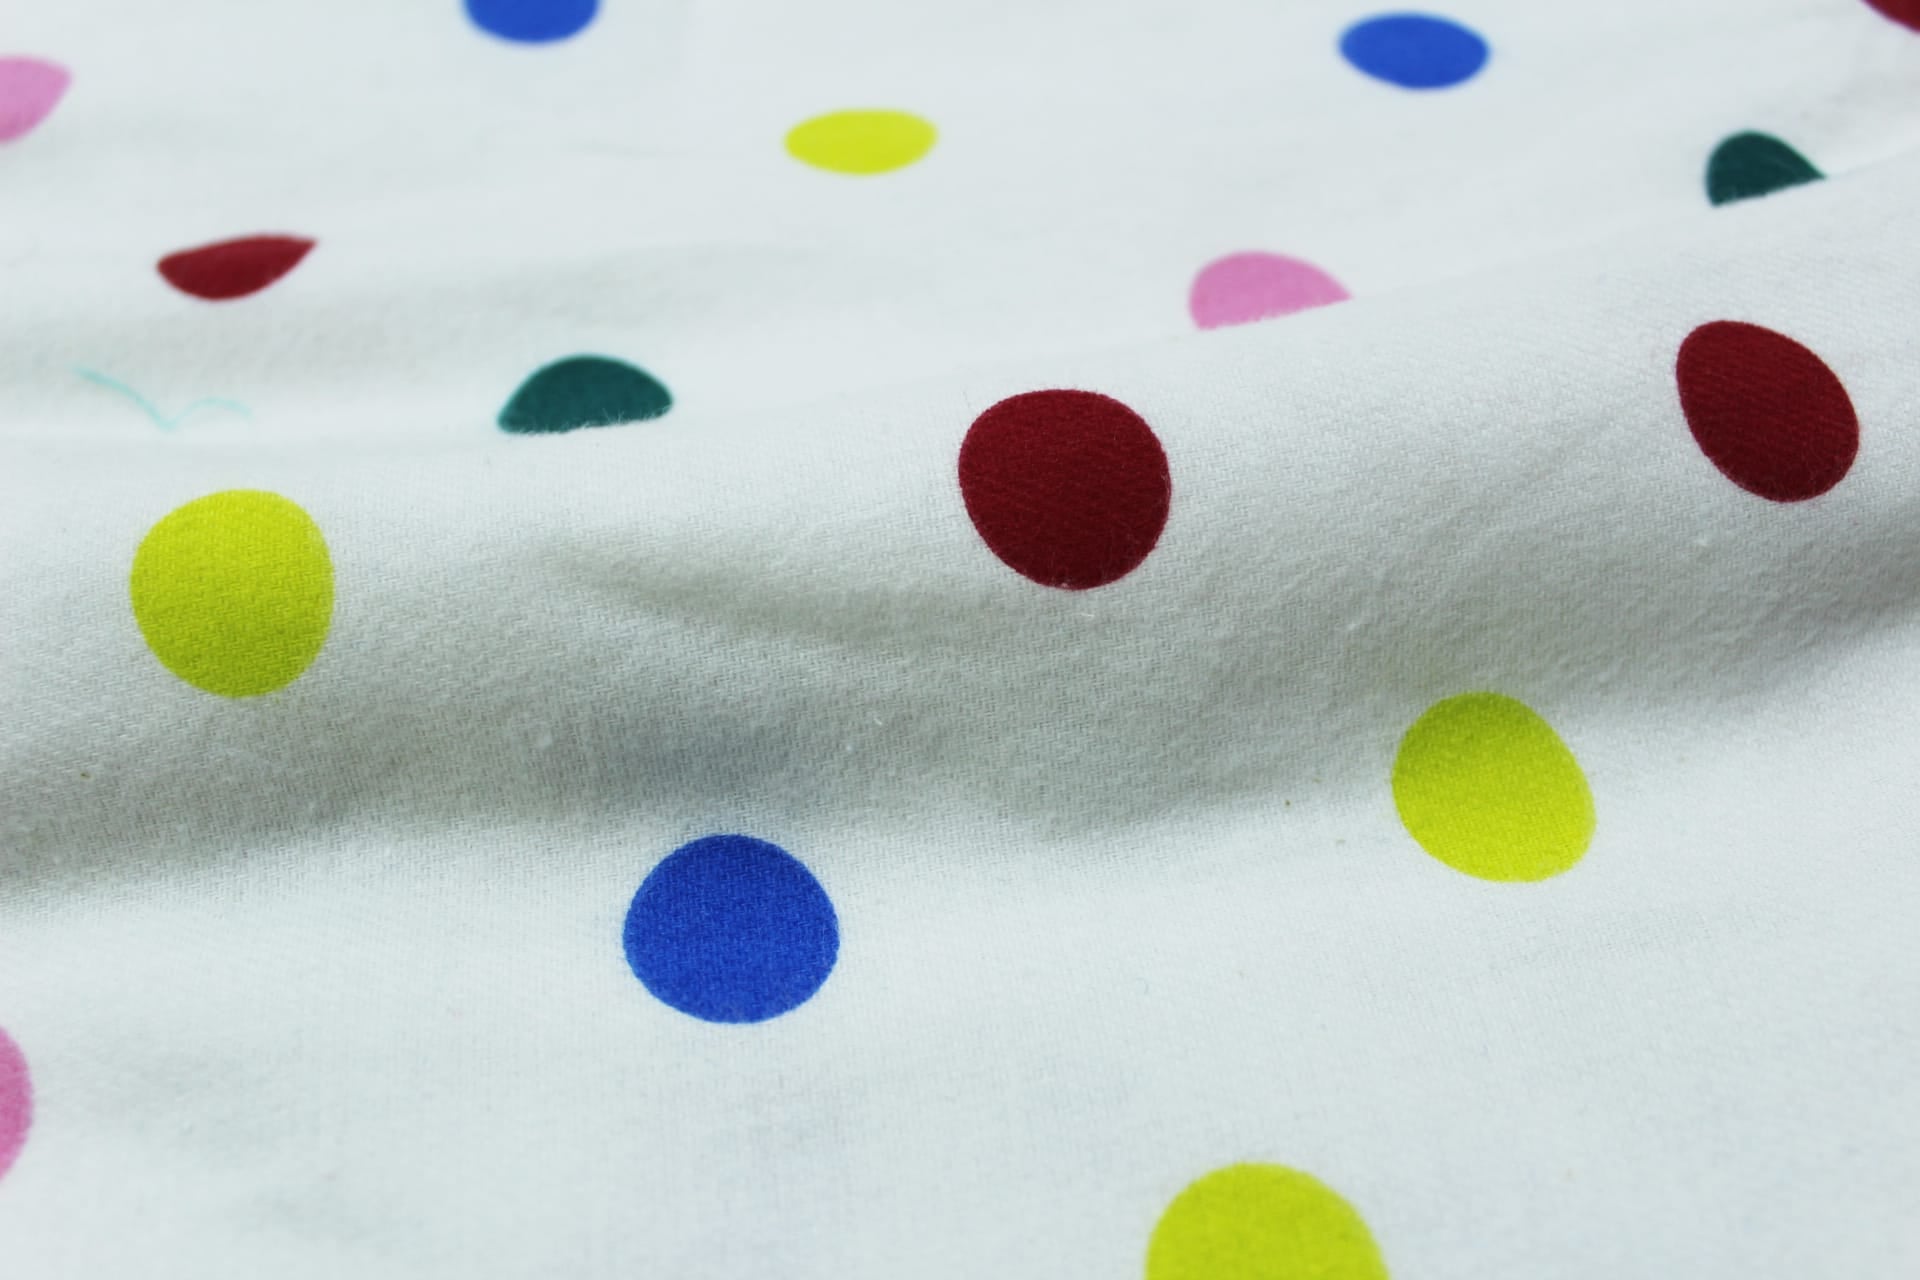 Cozy 3 layer Digital Print Cotton Flannel Blanket In Multicolor Online At Best prices